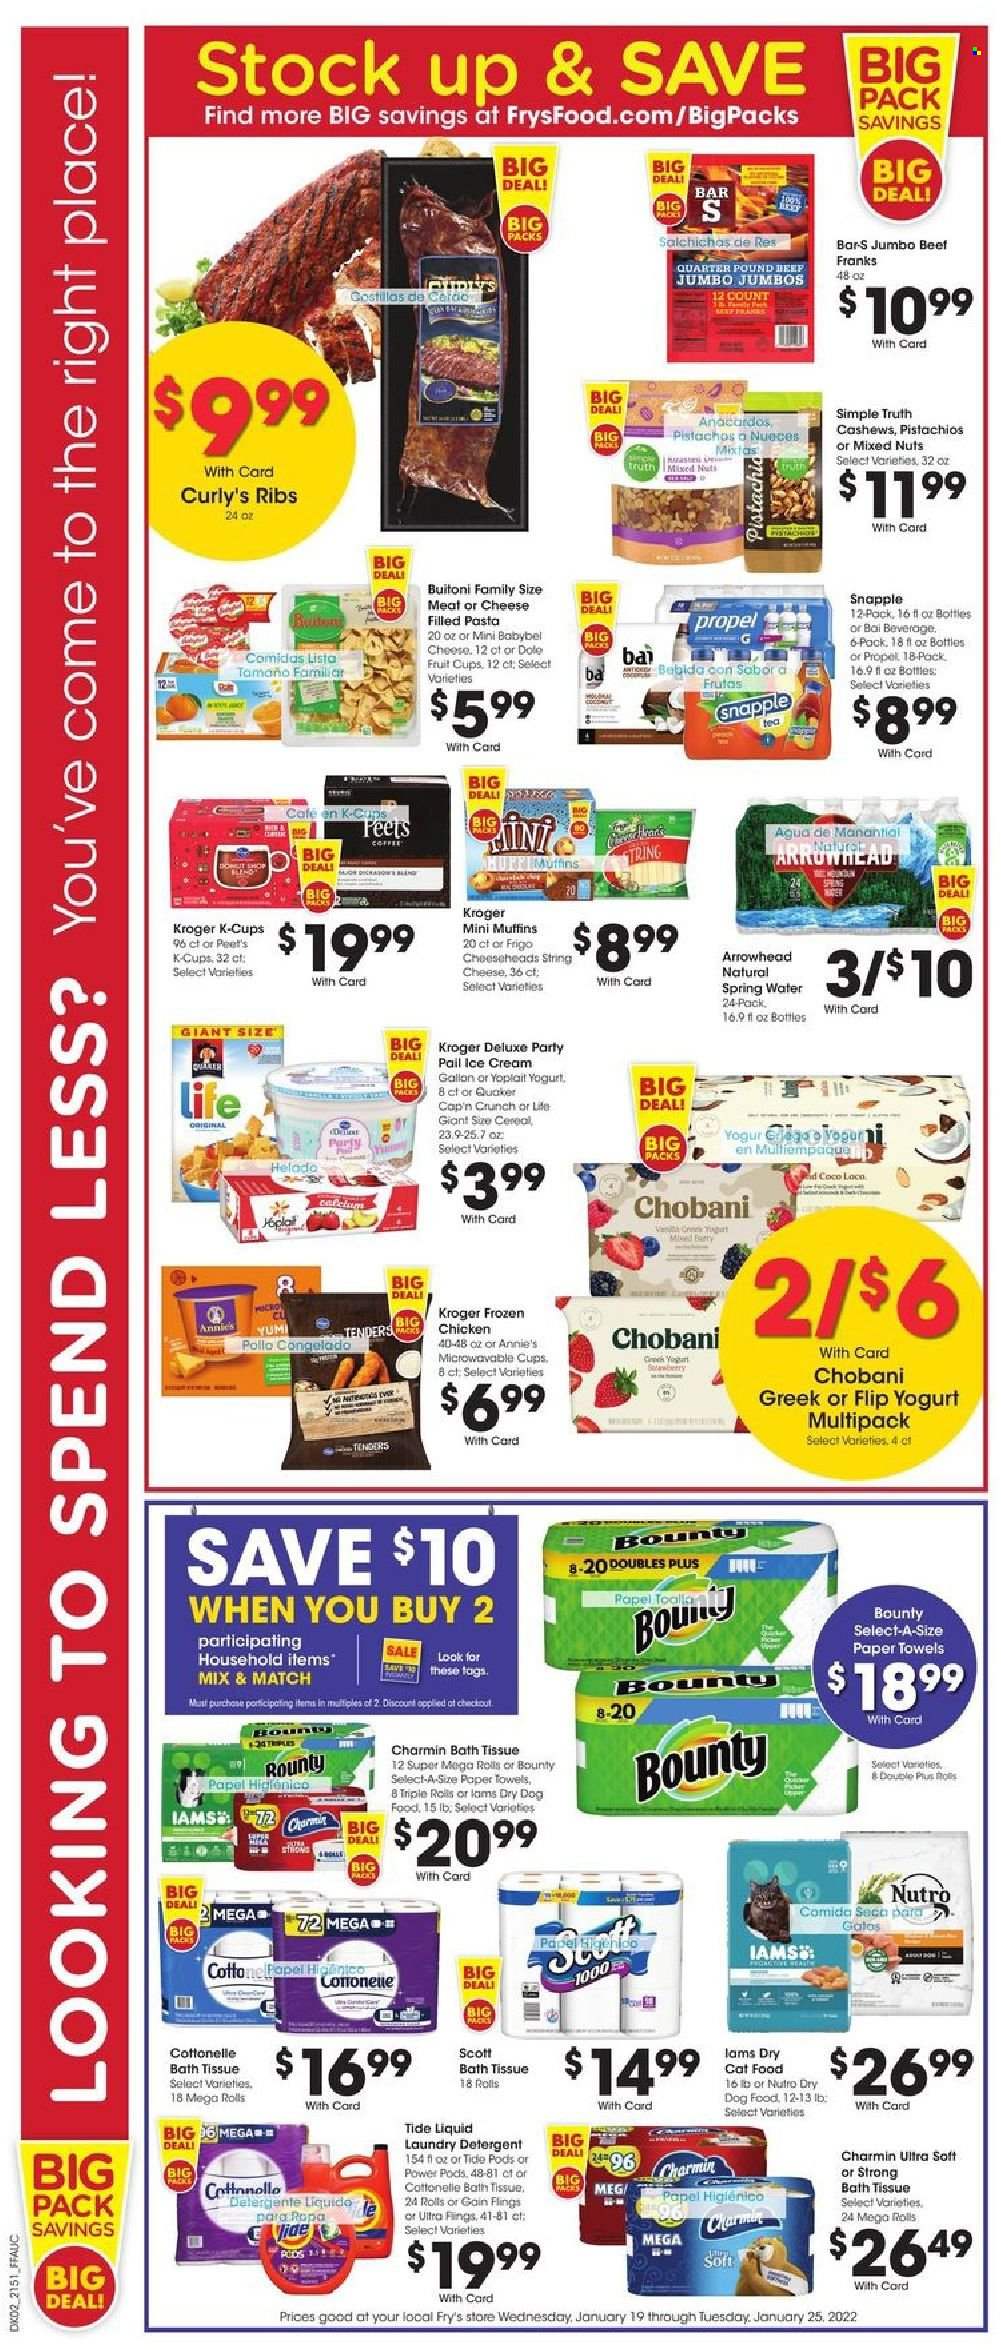 thumbnail - Fry’s Flyer - 01/19/2022 - 01/25/2022 - Sales products - fruit cup, muffin, Dole, pasta, Quaker, Annie's, Buitoni, filled pasta, string cheese, Babybel, yoghurt, Yoplait, Chobani, ice cream, Bounty, cereals, Cap'n Crunch, cashews, pistachios, mixed nuts, Snapple, spring water, tea, coffee, coffee capsules, K-Cups, bath tissue, Cottonelle, Scott, kitchen towels, paper towels, Charmin, detergent, Gain, Tide, laundry detergent, animal food, cat food, dog food, dry dog food, dry cat food, Iams. Page 3.